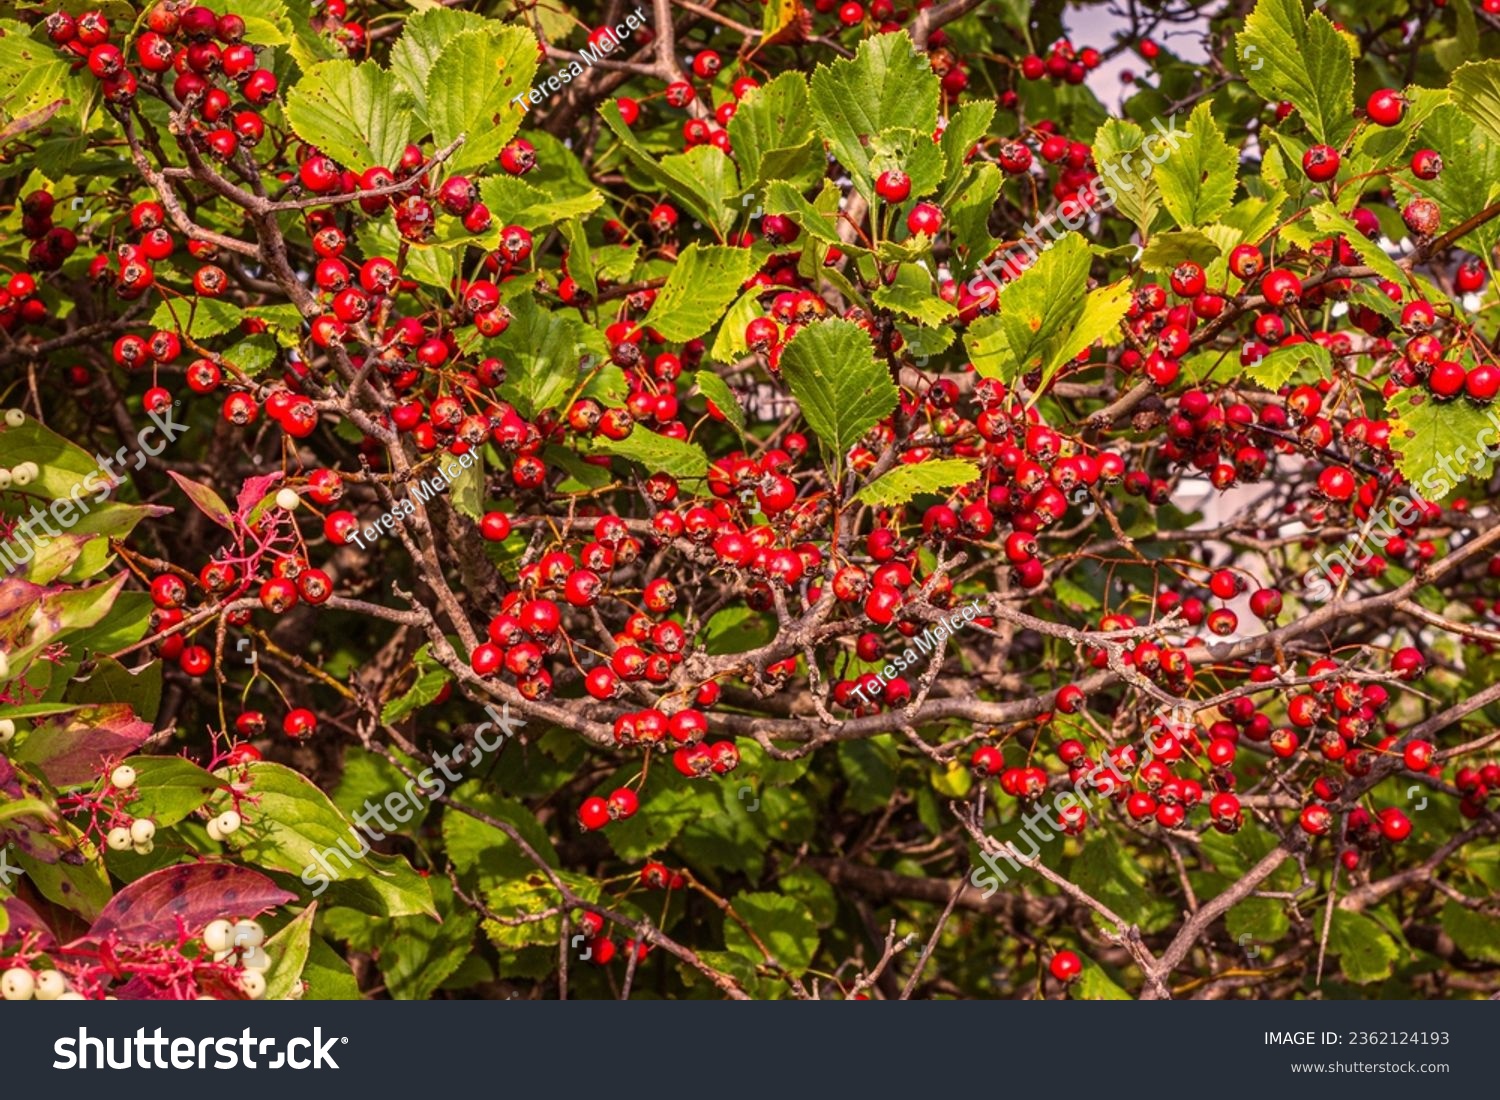  bush with red berries in autumn garden. Red fruits of Crataegus monogyna; known as hawthorn or single-seeded hawthorn; autumn background; autumn concept #2362124193